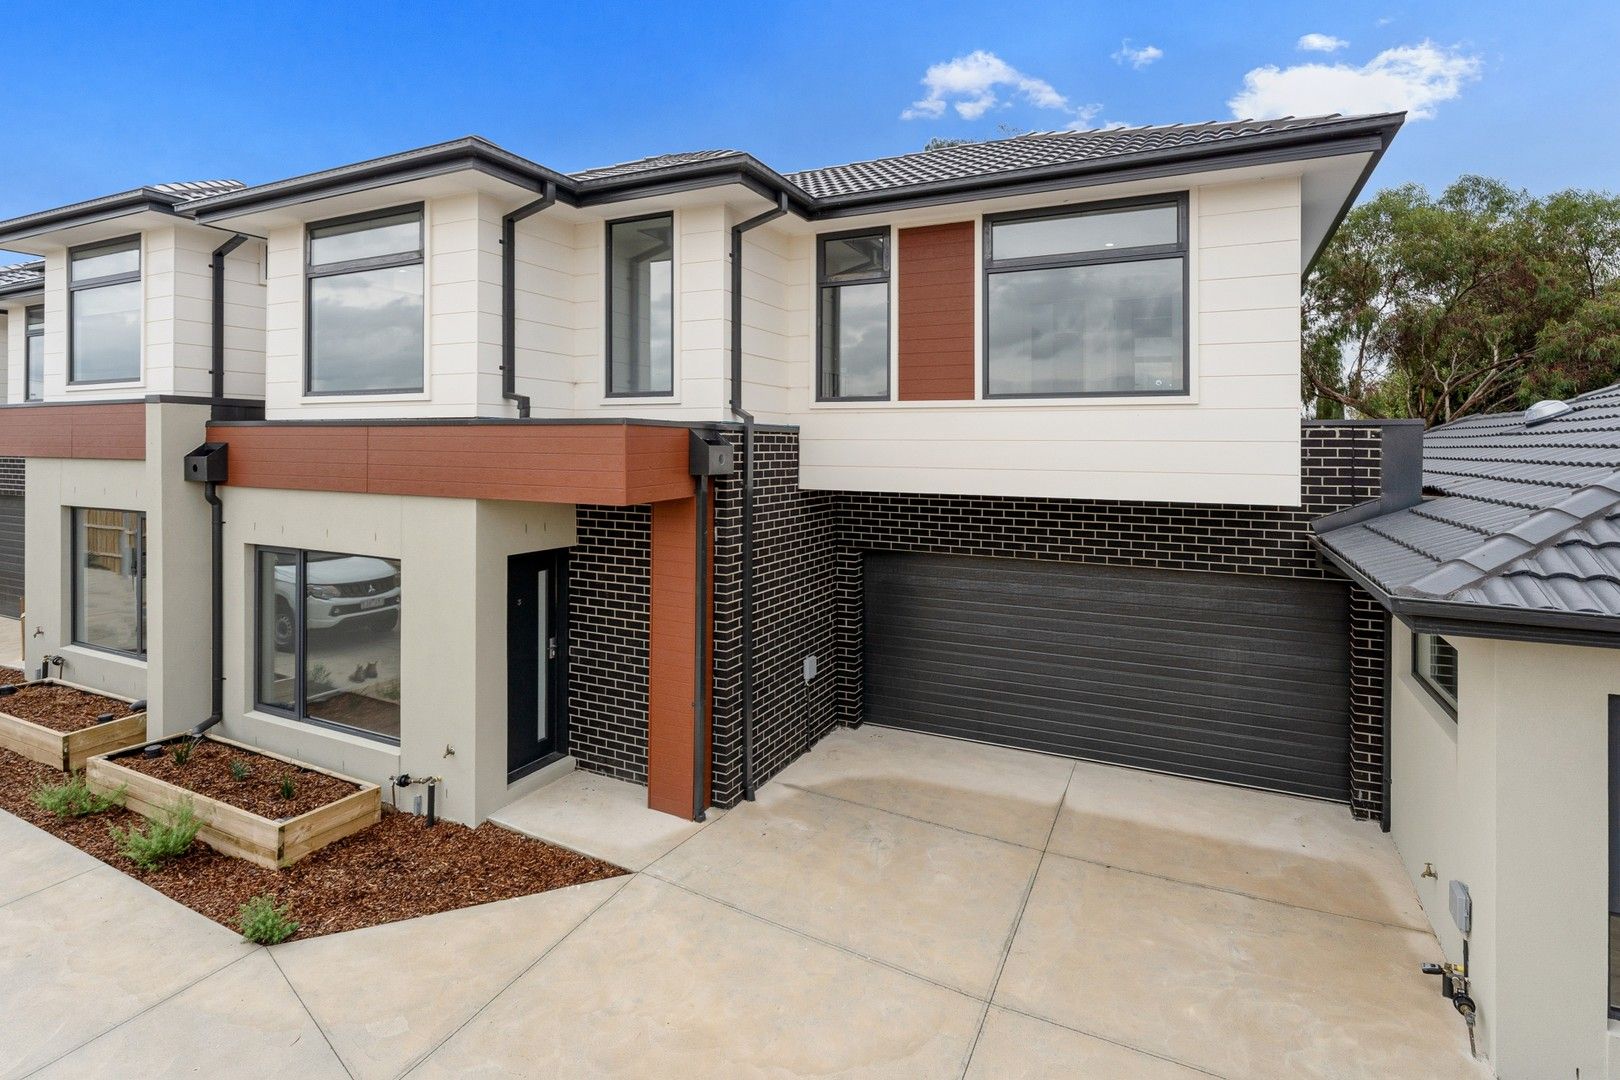 3 bedrooms Townhouse in 3/51 Darbyshire St SUNBURY VIC, 3429